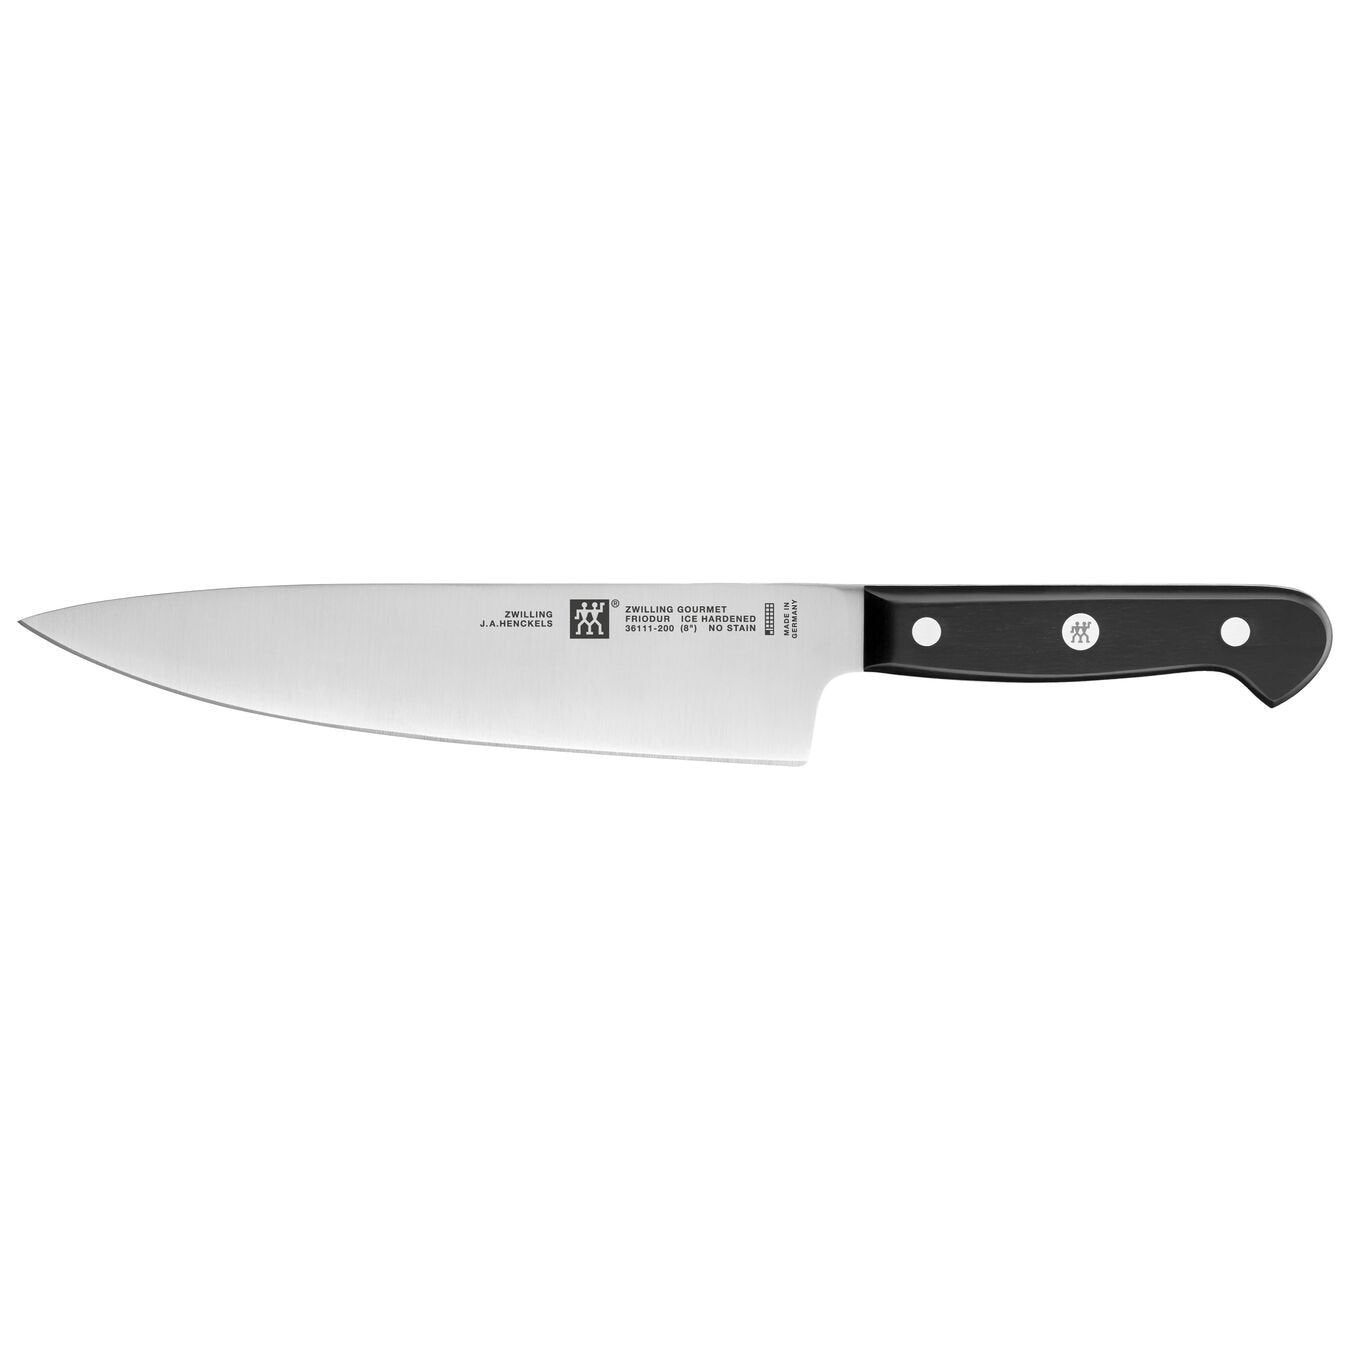 chef's knife with riveted black handle on white background